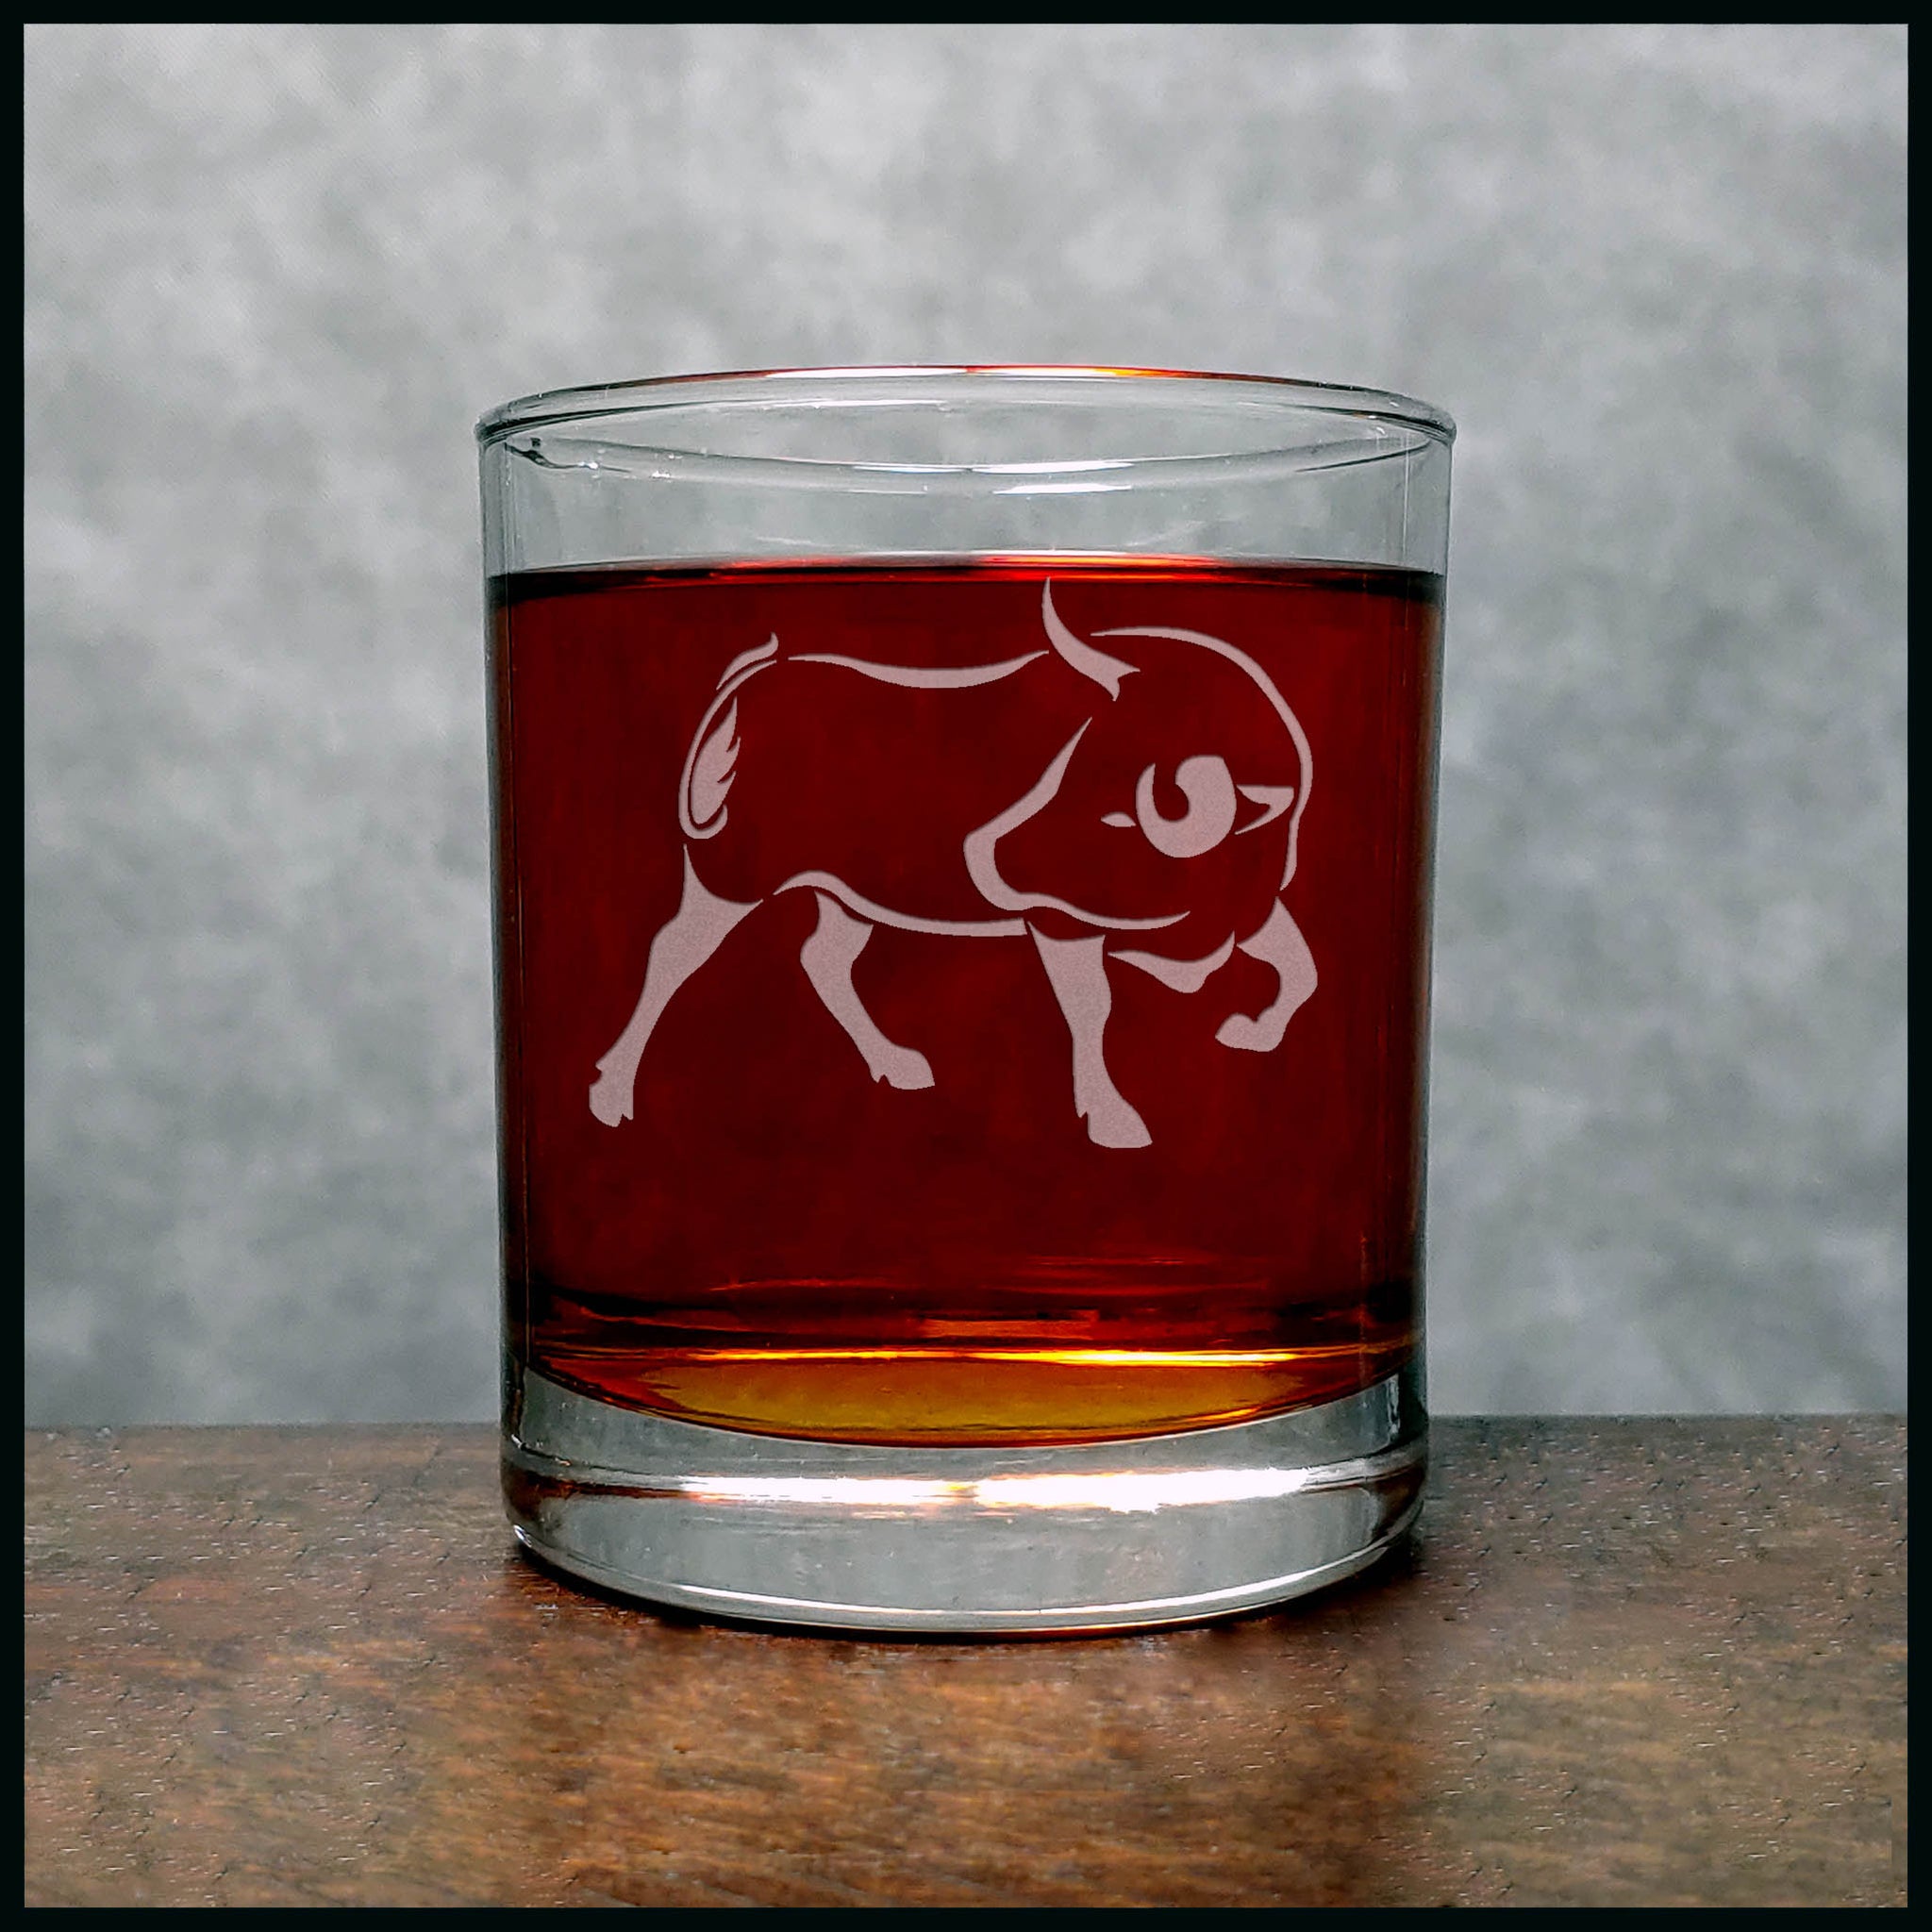 Personalized Bull Whisky Glass - Design 2 - Copyright Hues in Glass